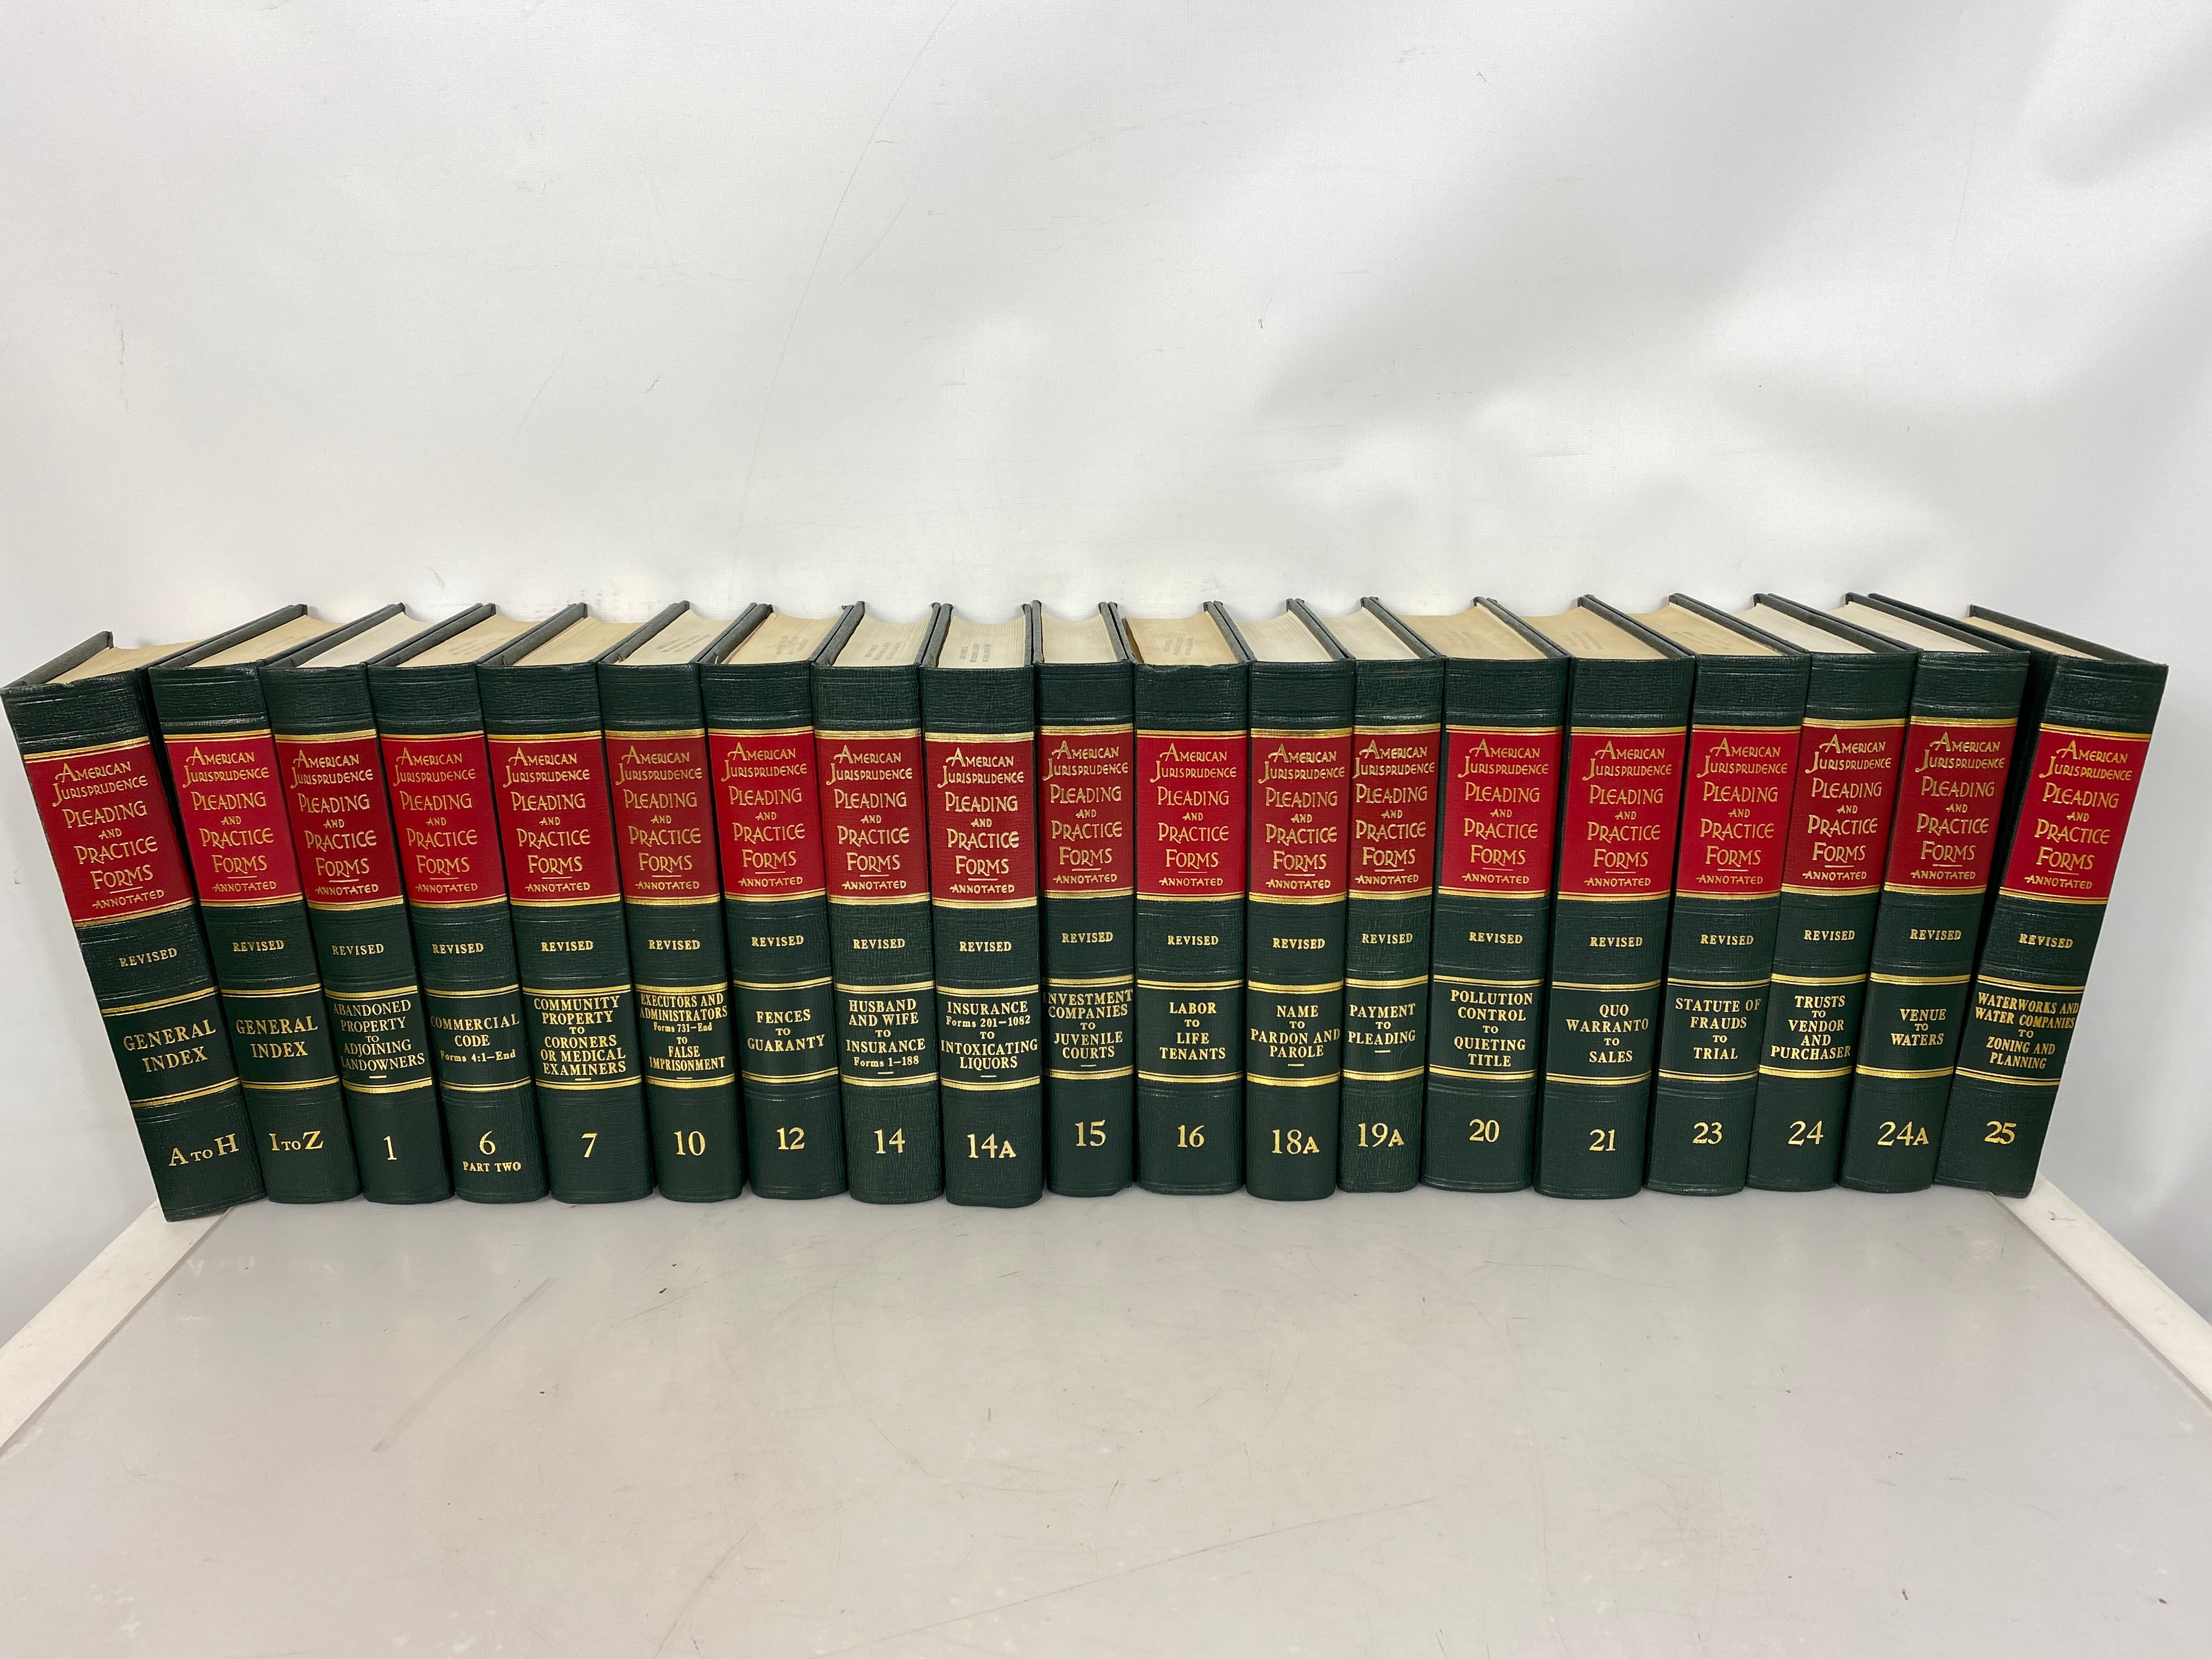 American Jurisprudence Pleading and Practice Forms 21 Volumes, Includes 2 Volume General Index